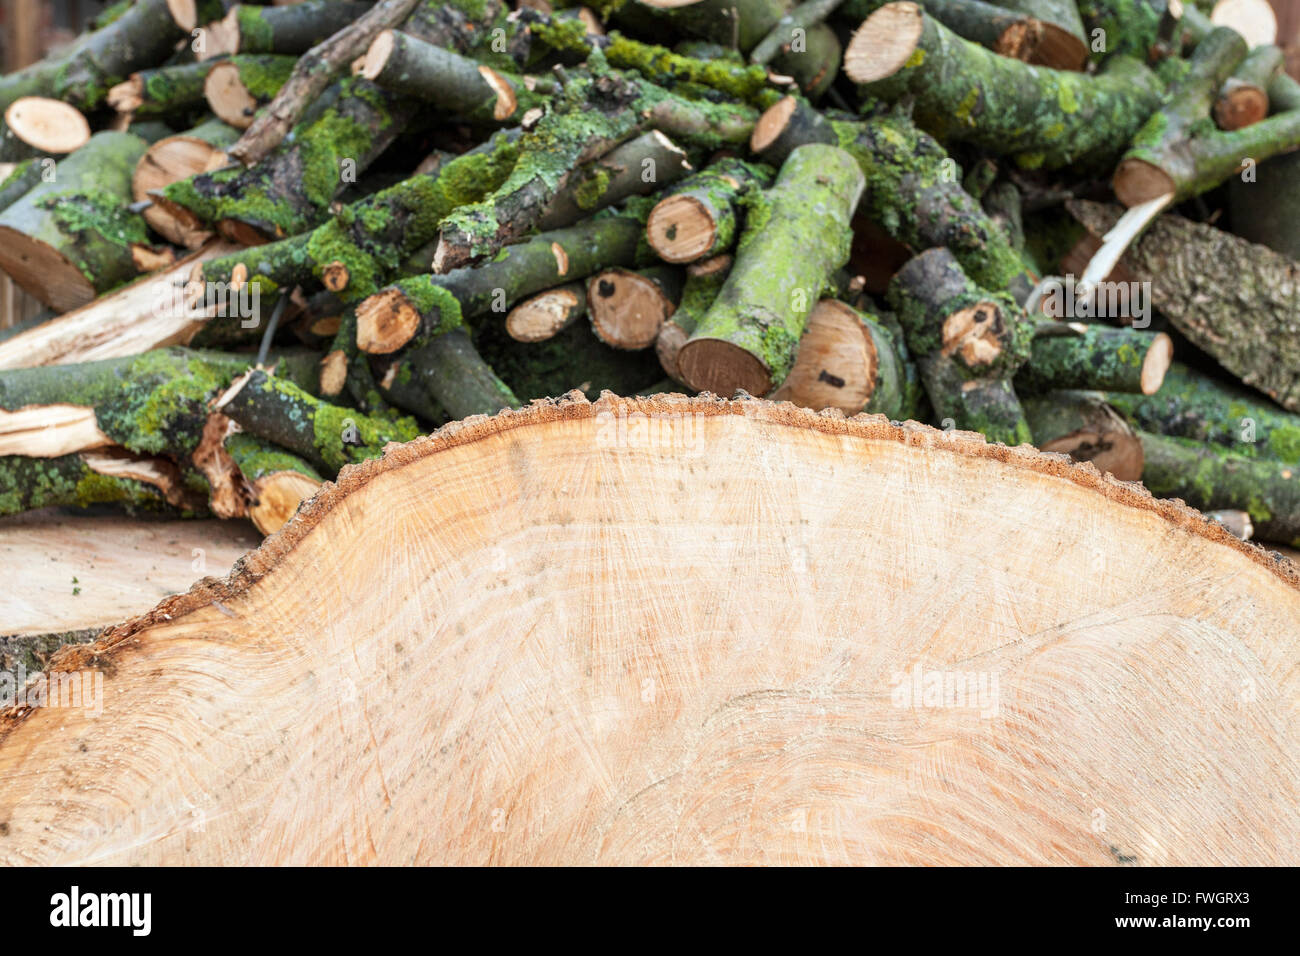 Cross section of tree trunk with a pile of logs in the background from the remains of a cut down tree, England, UK Stock Photo